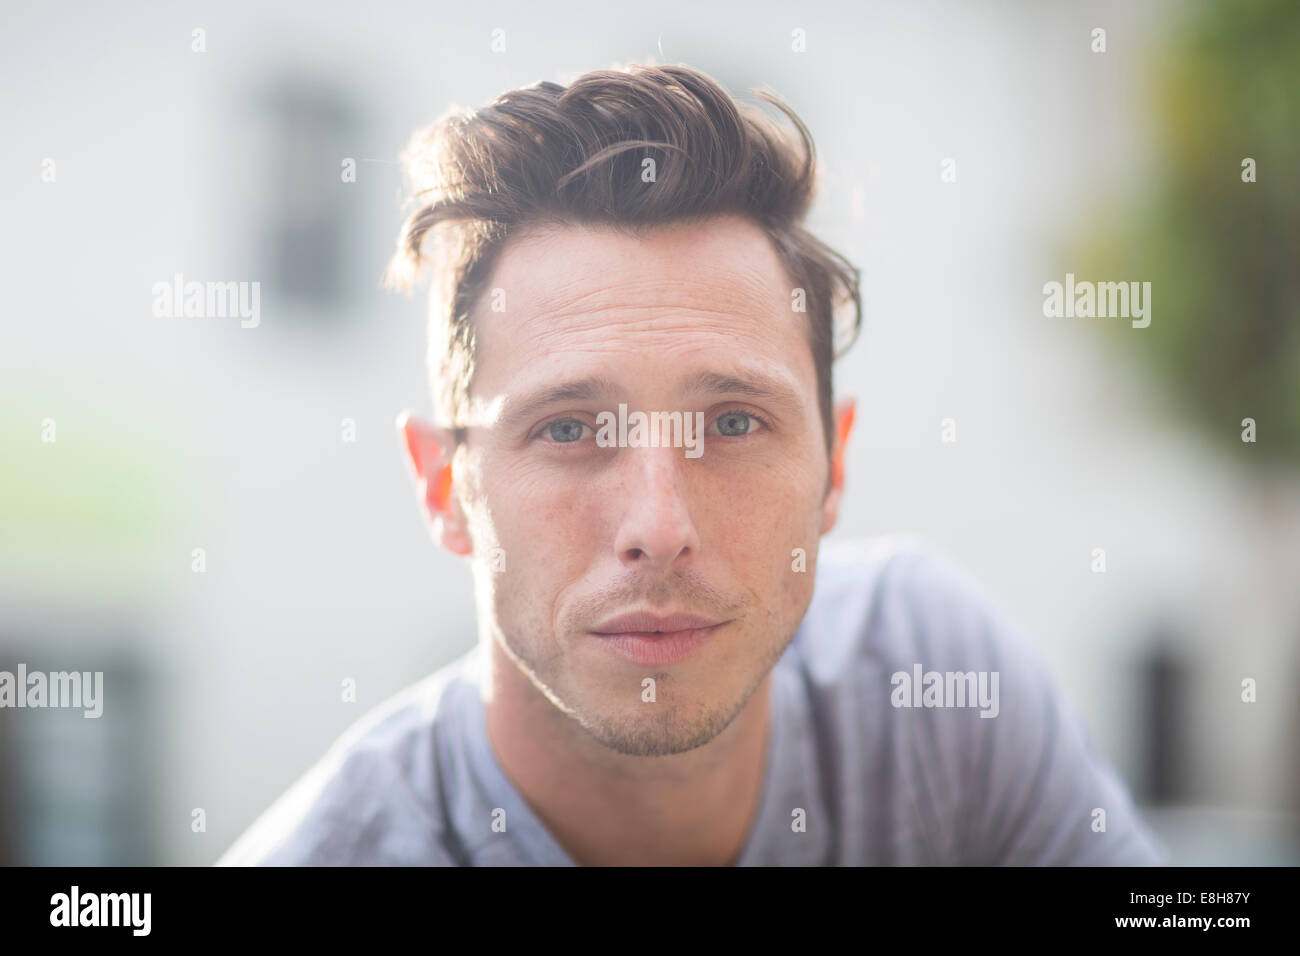 Portrait of young man with quiff Stock Photo